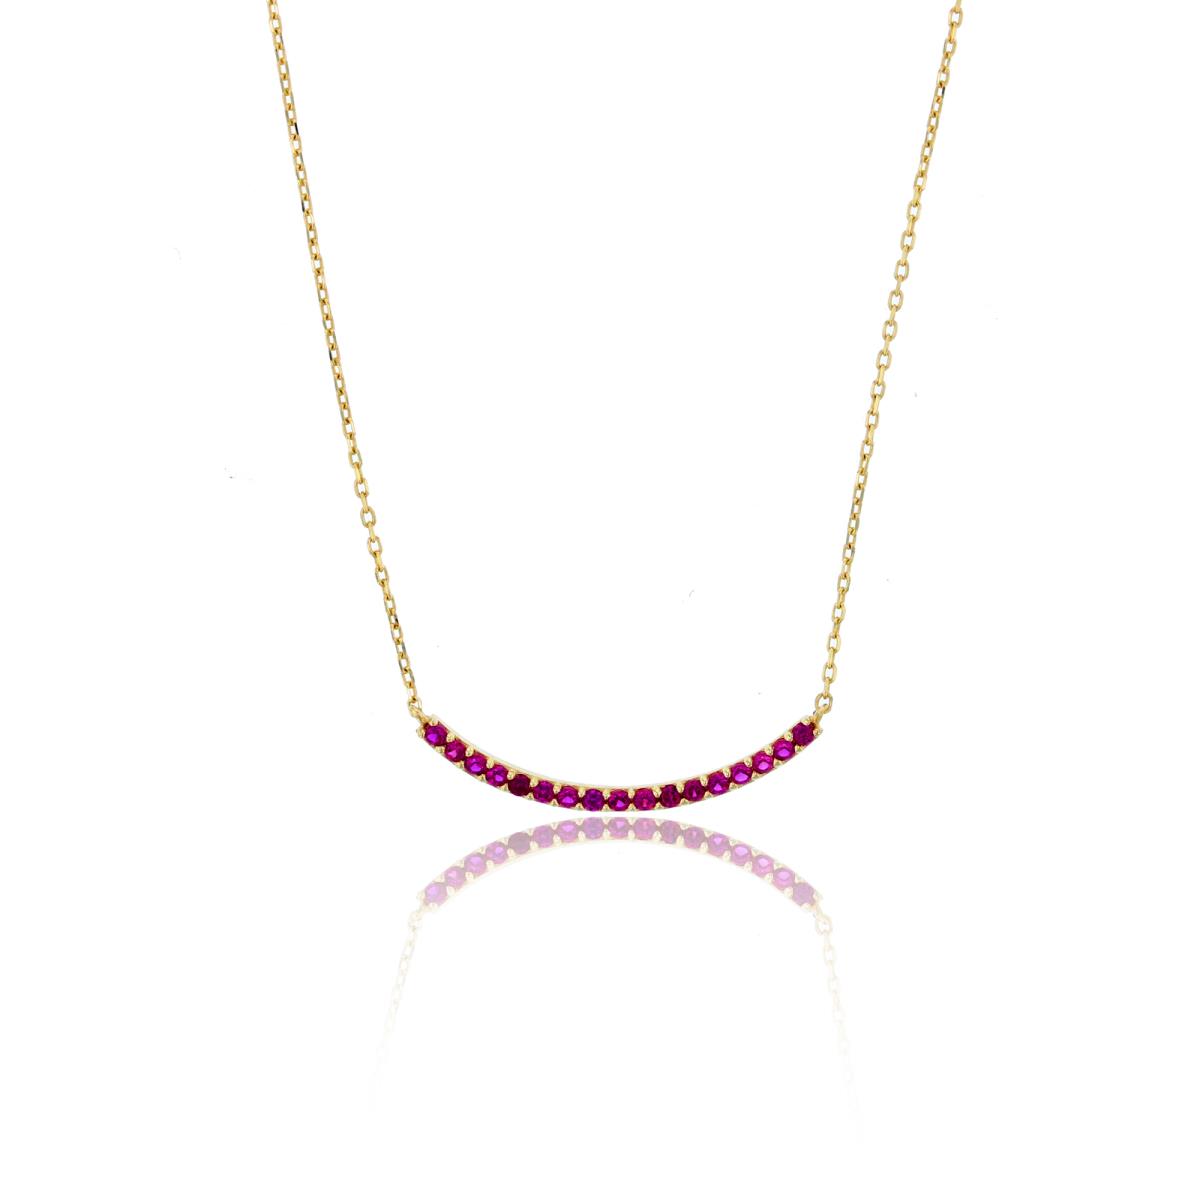 10KY Yellow Gold 18" Polished Pave 1.20mm Red Round Ruby Bar Necklace